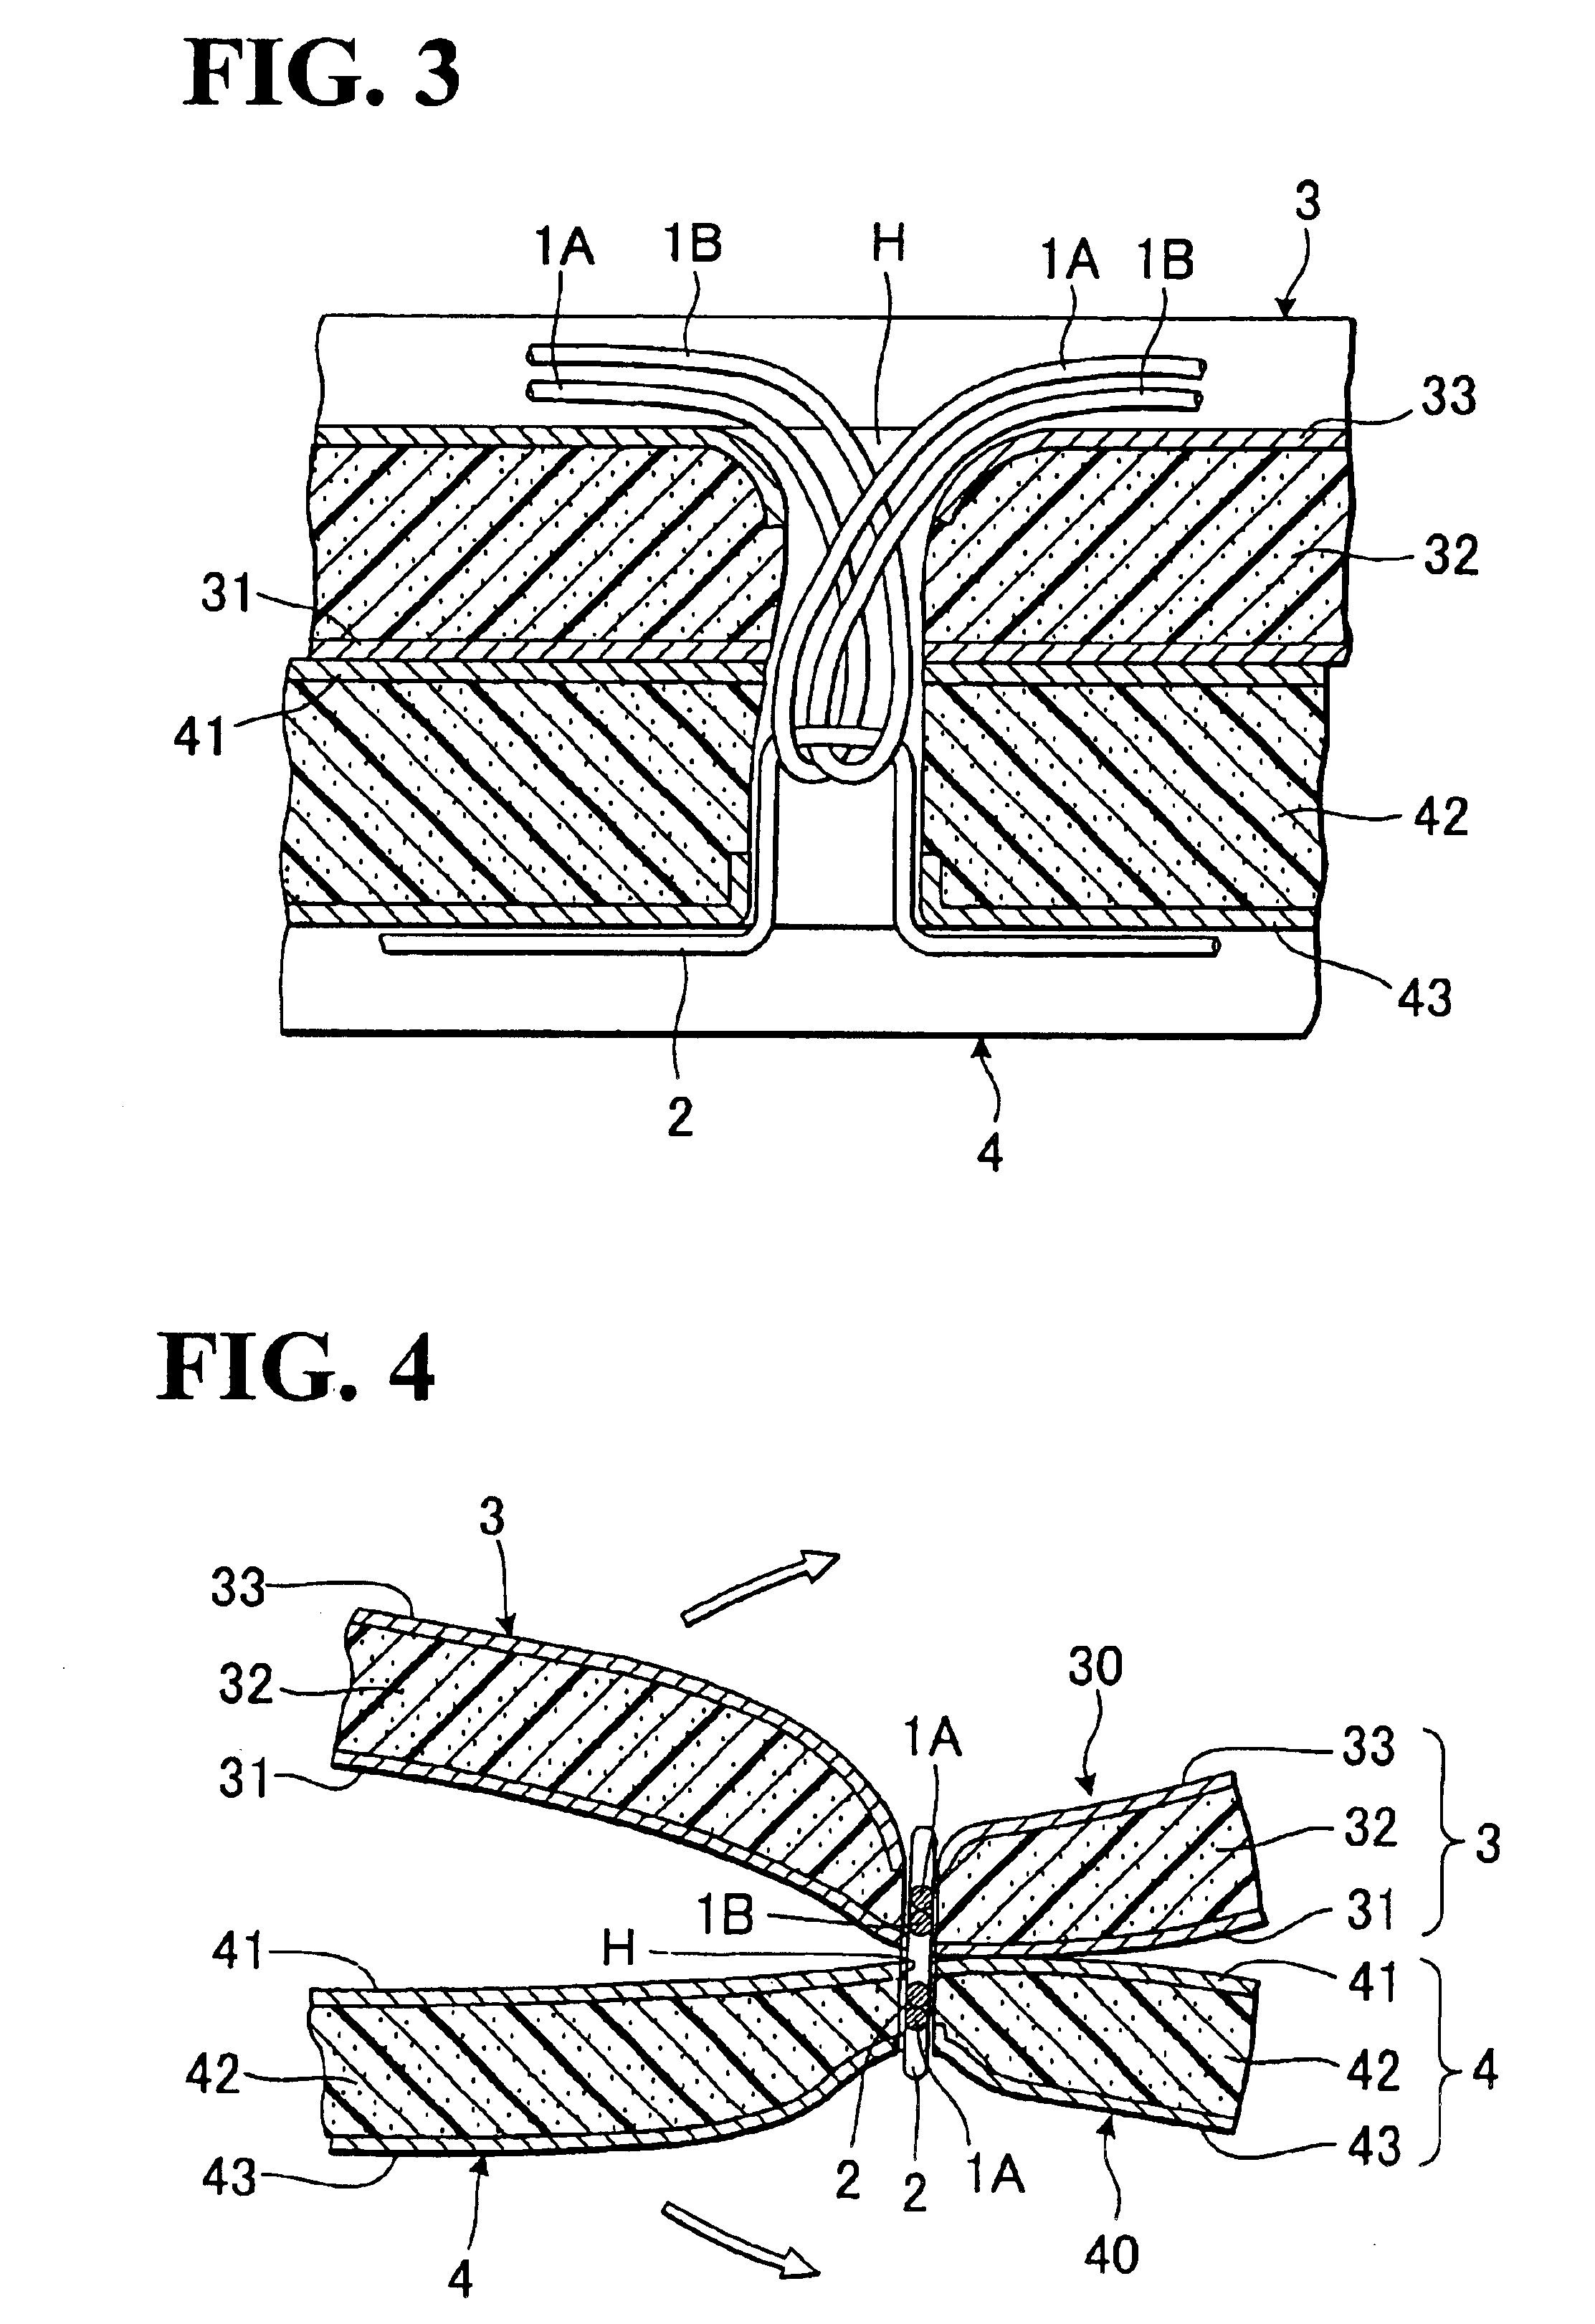 Method for sewing together covering elements adapted to undergo foaming process